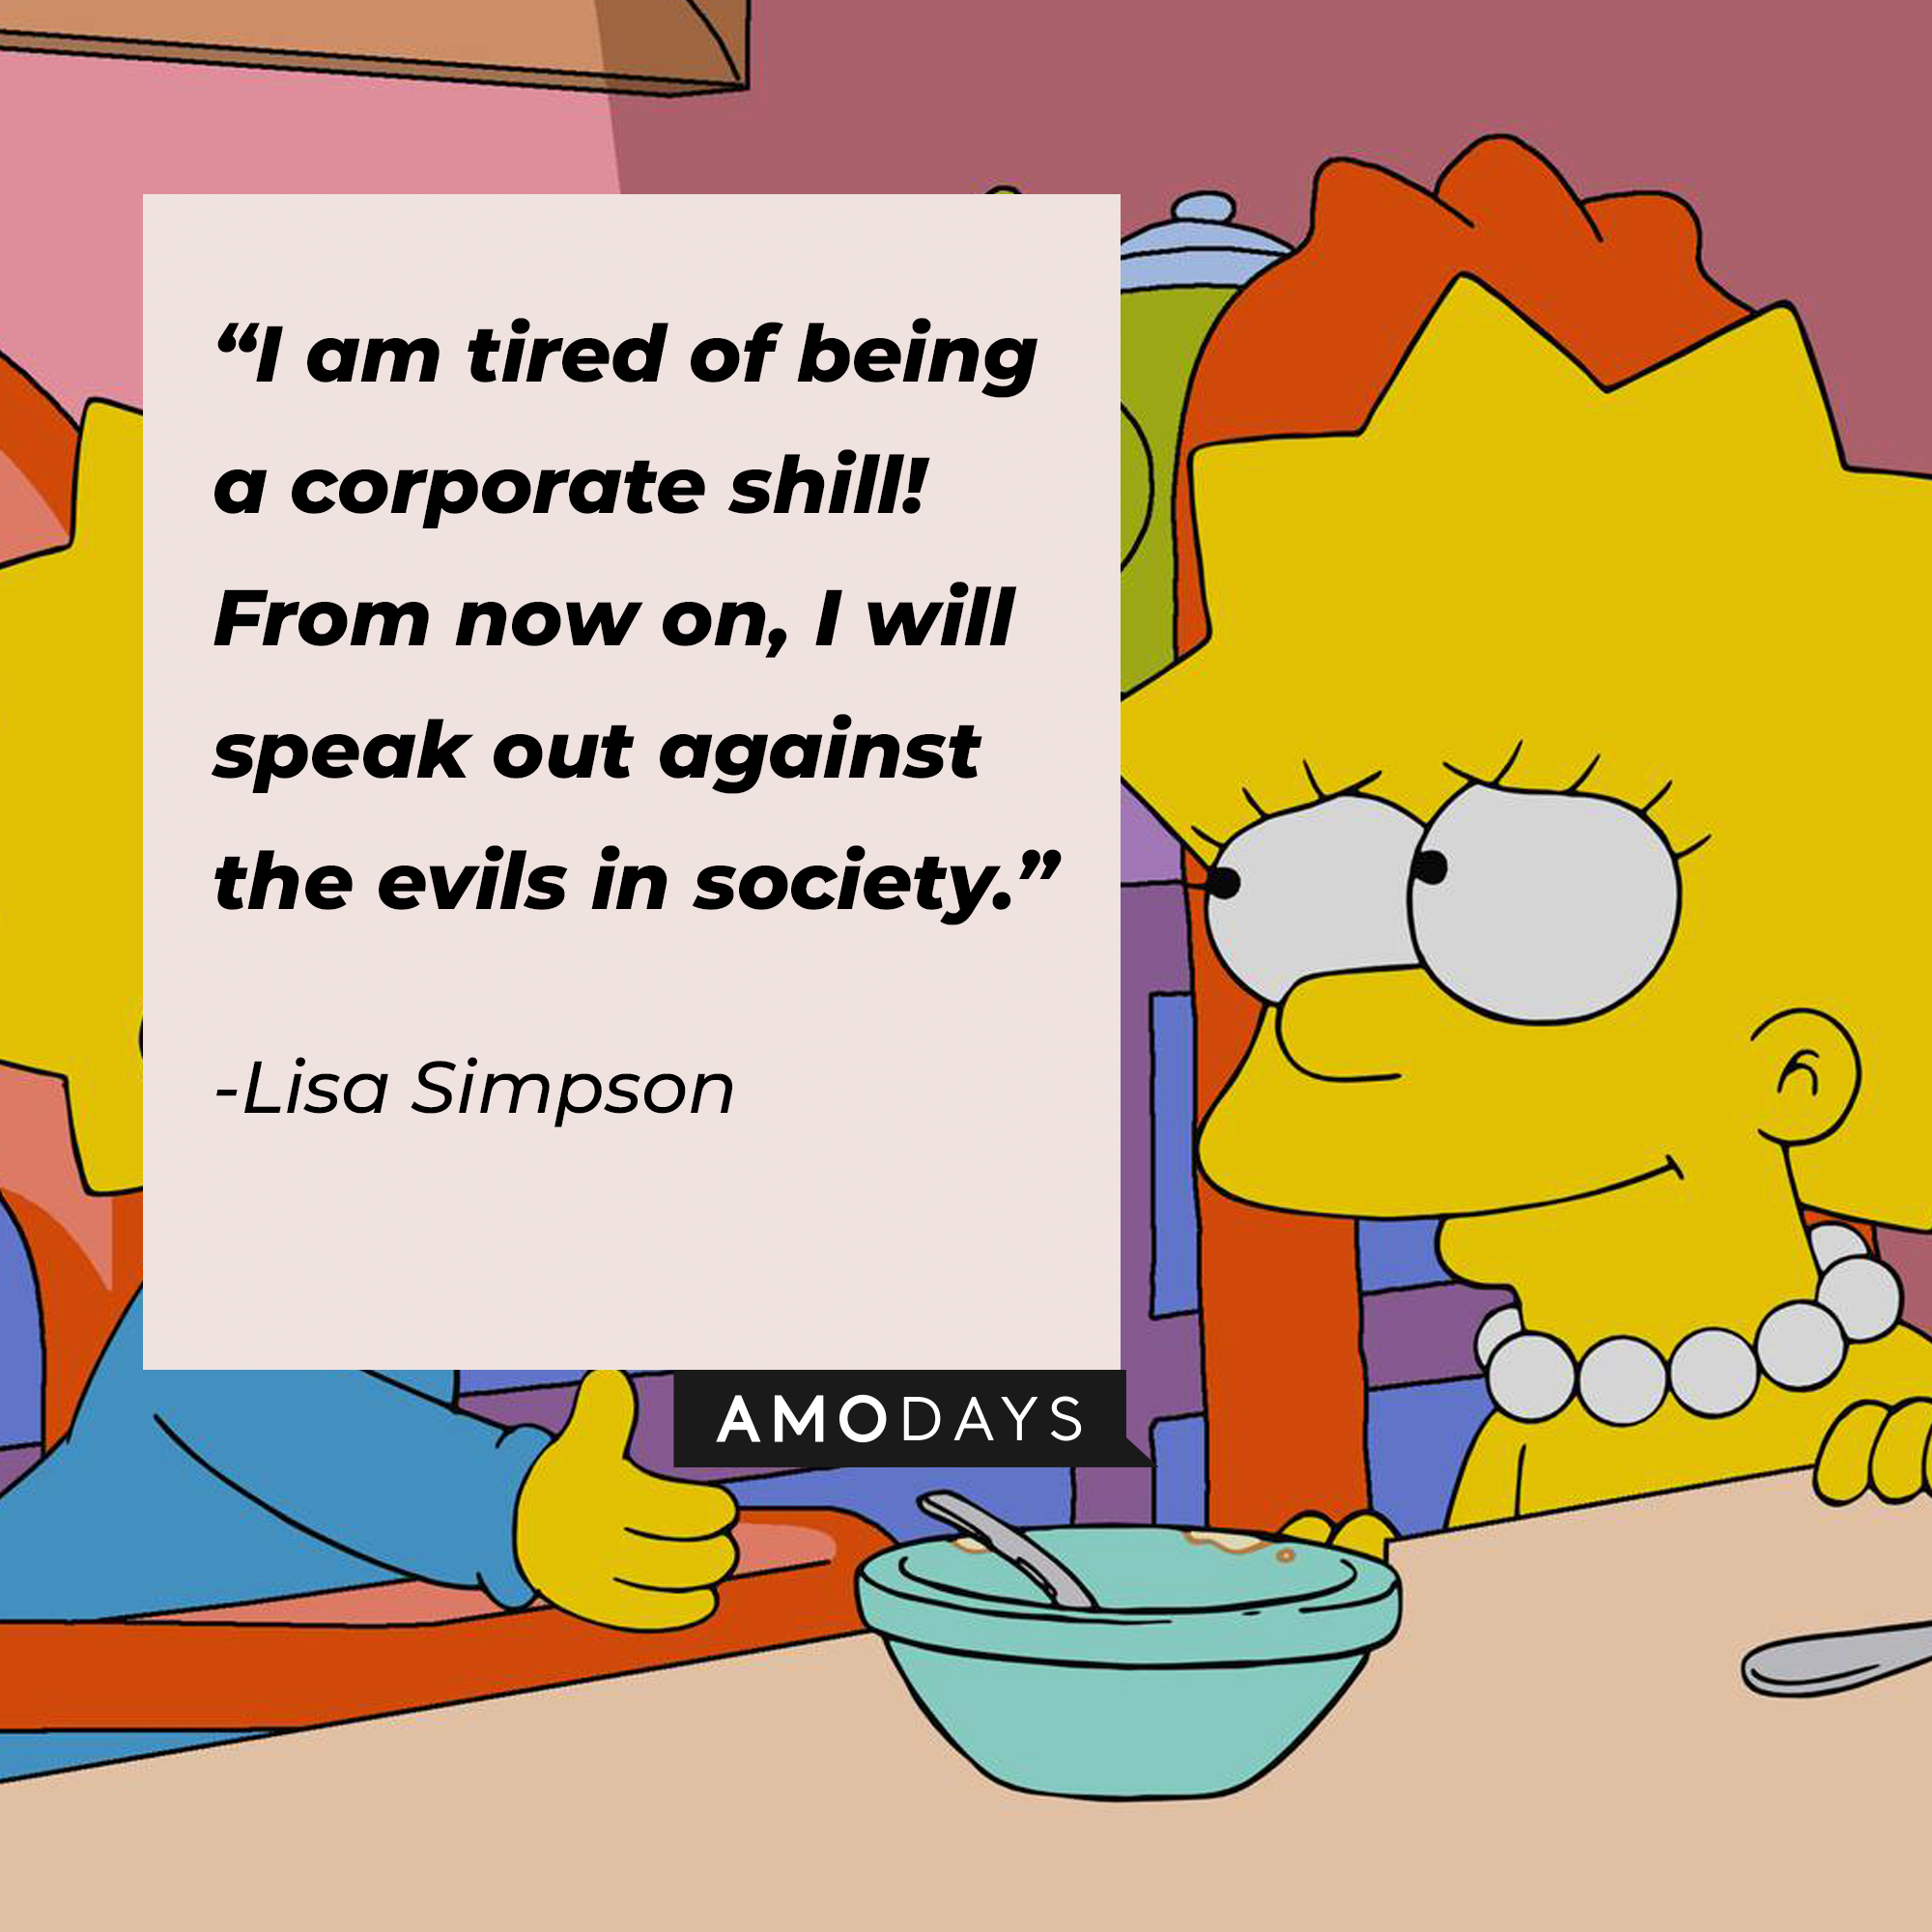 Lisa Simpson, with her quote: "I am tired of being a corporate shill! From now on, I will speak out against the evils in society.” | Source: facebook.com/TheSimpsons